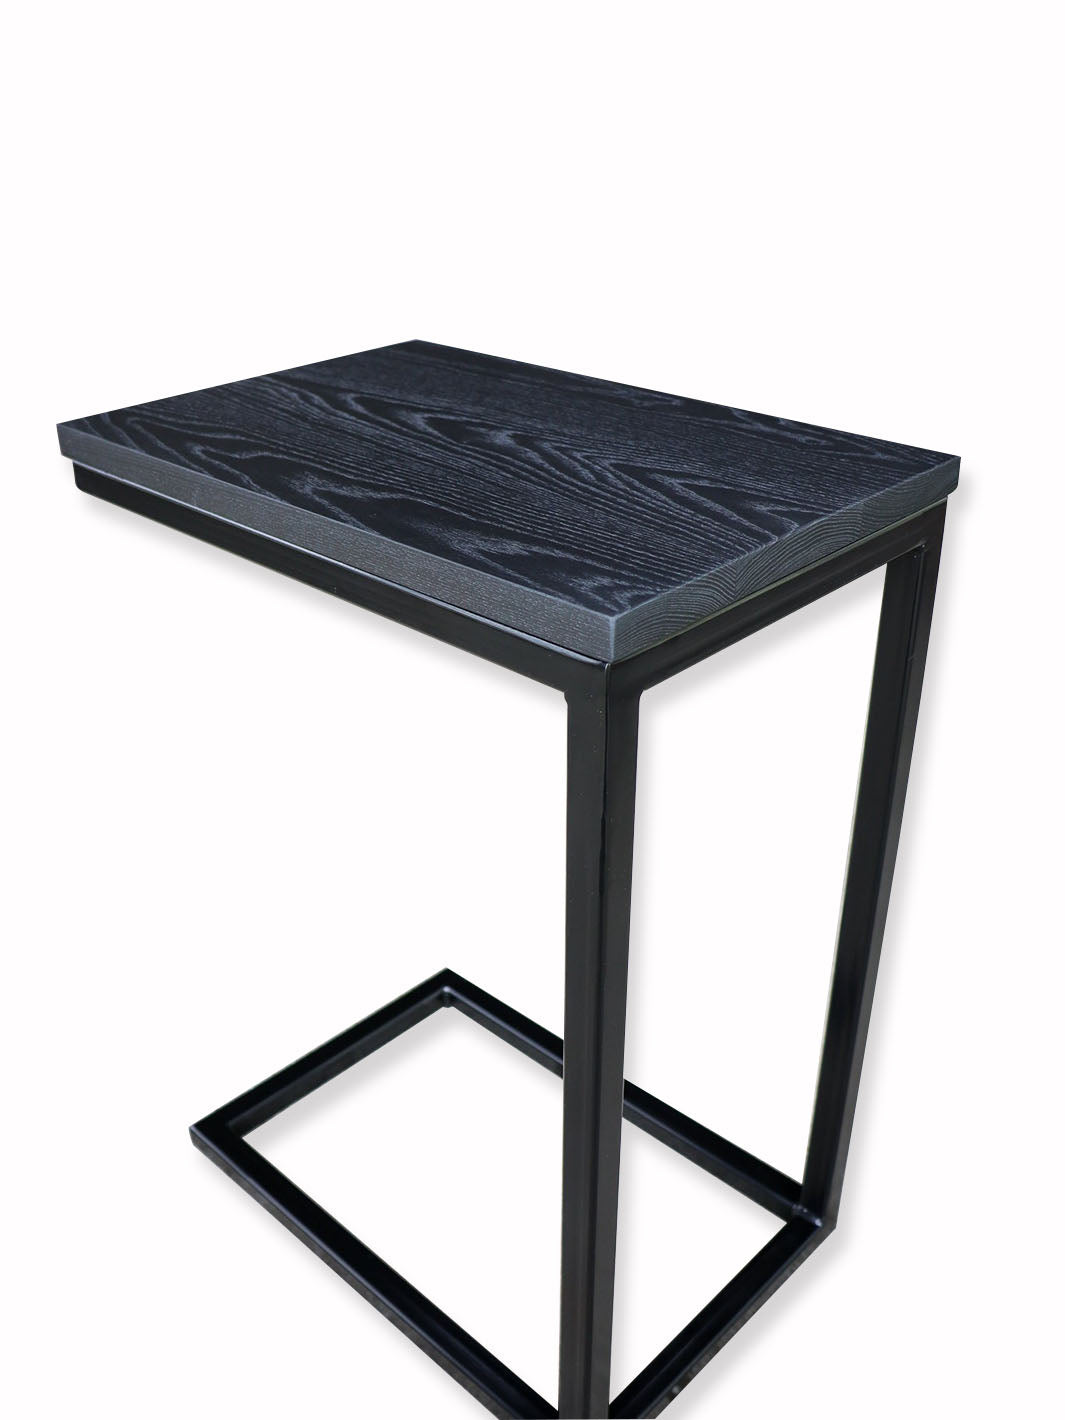 Charcoal Black Ash Industrial Side C Table Earthly Comfort Side Tables 771-1